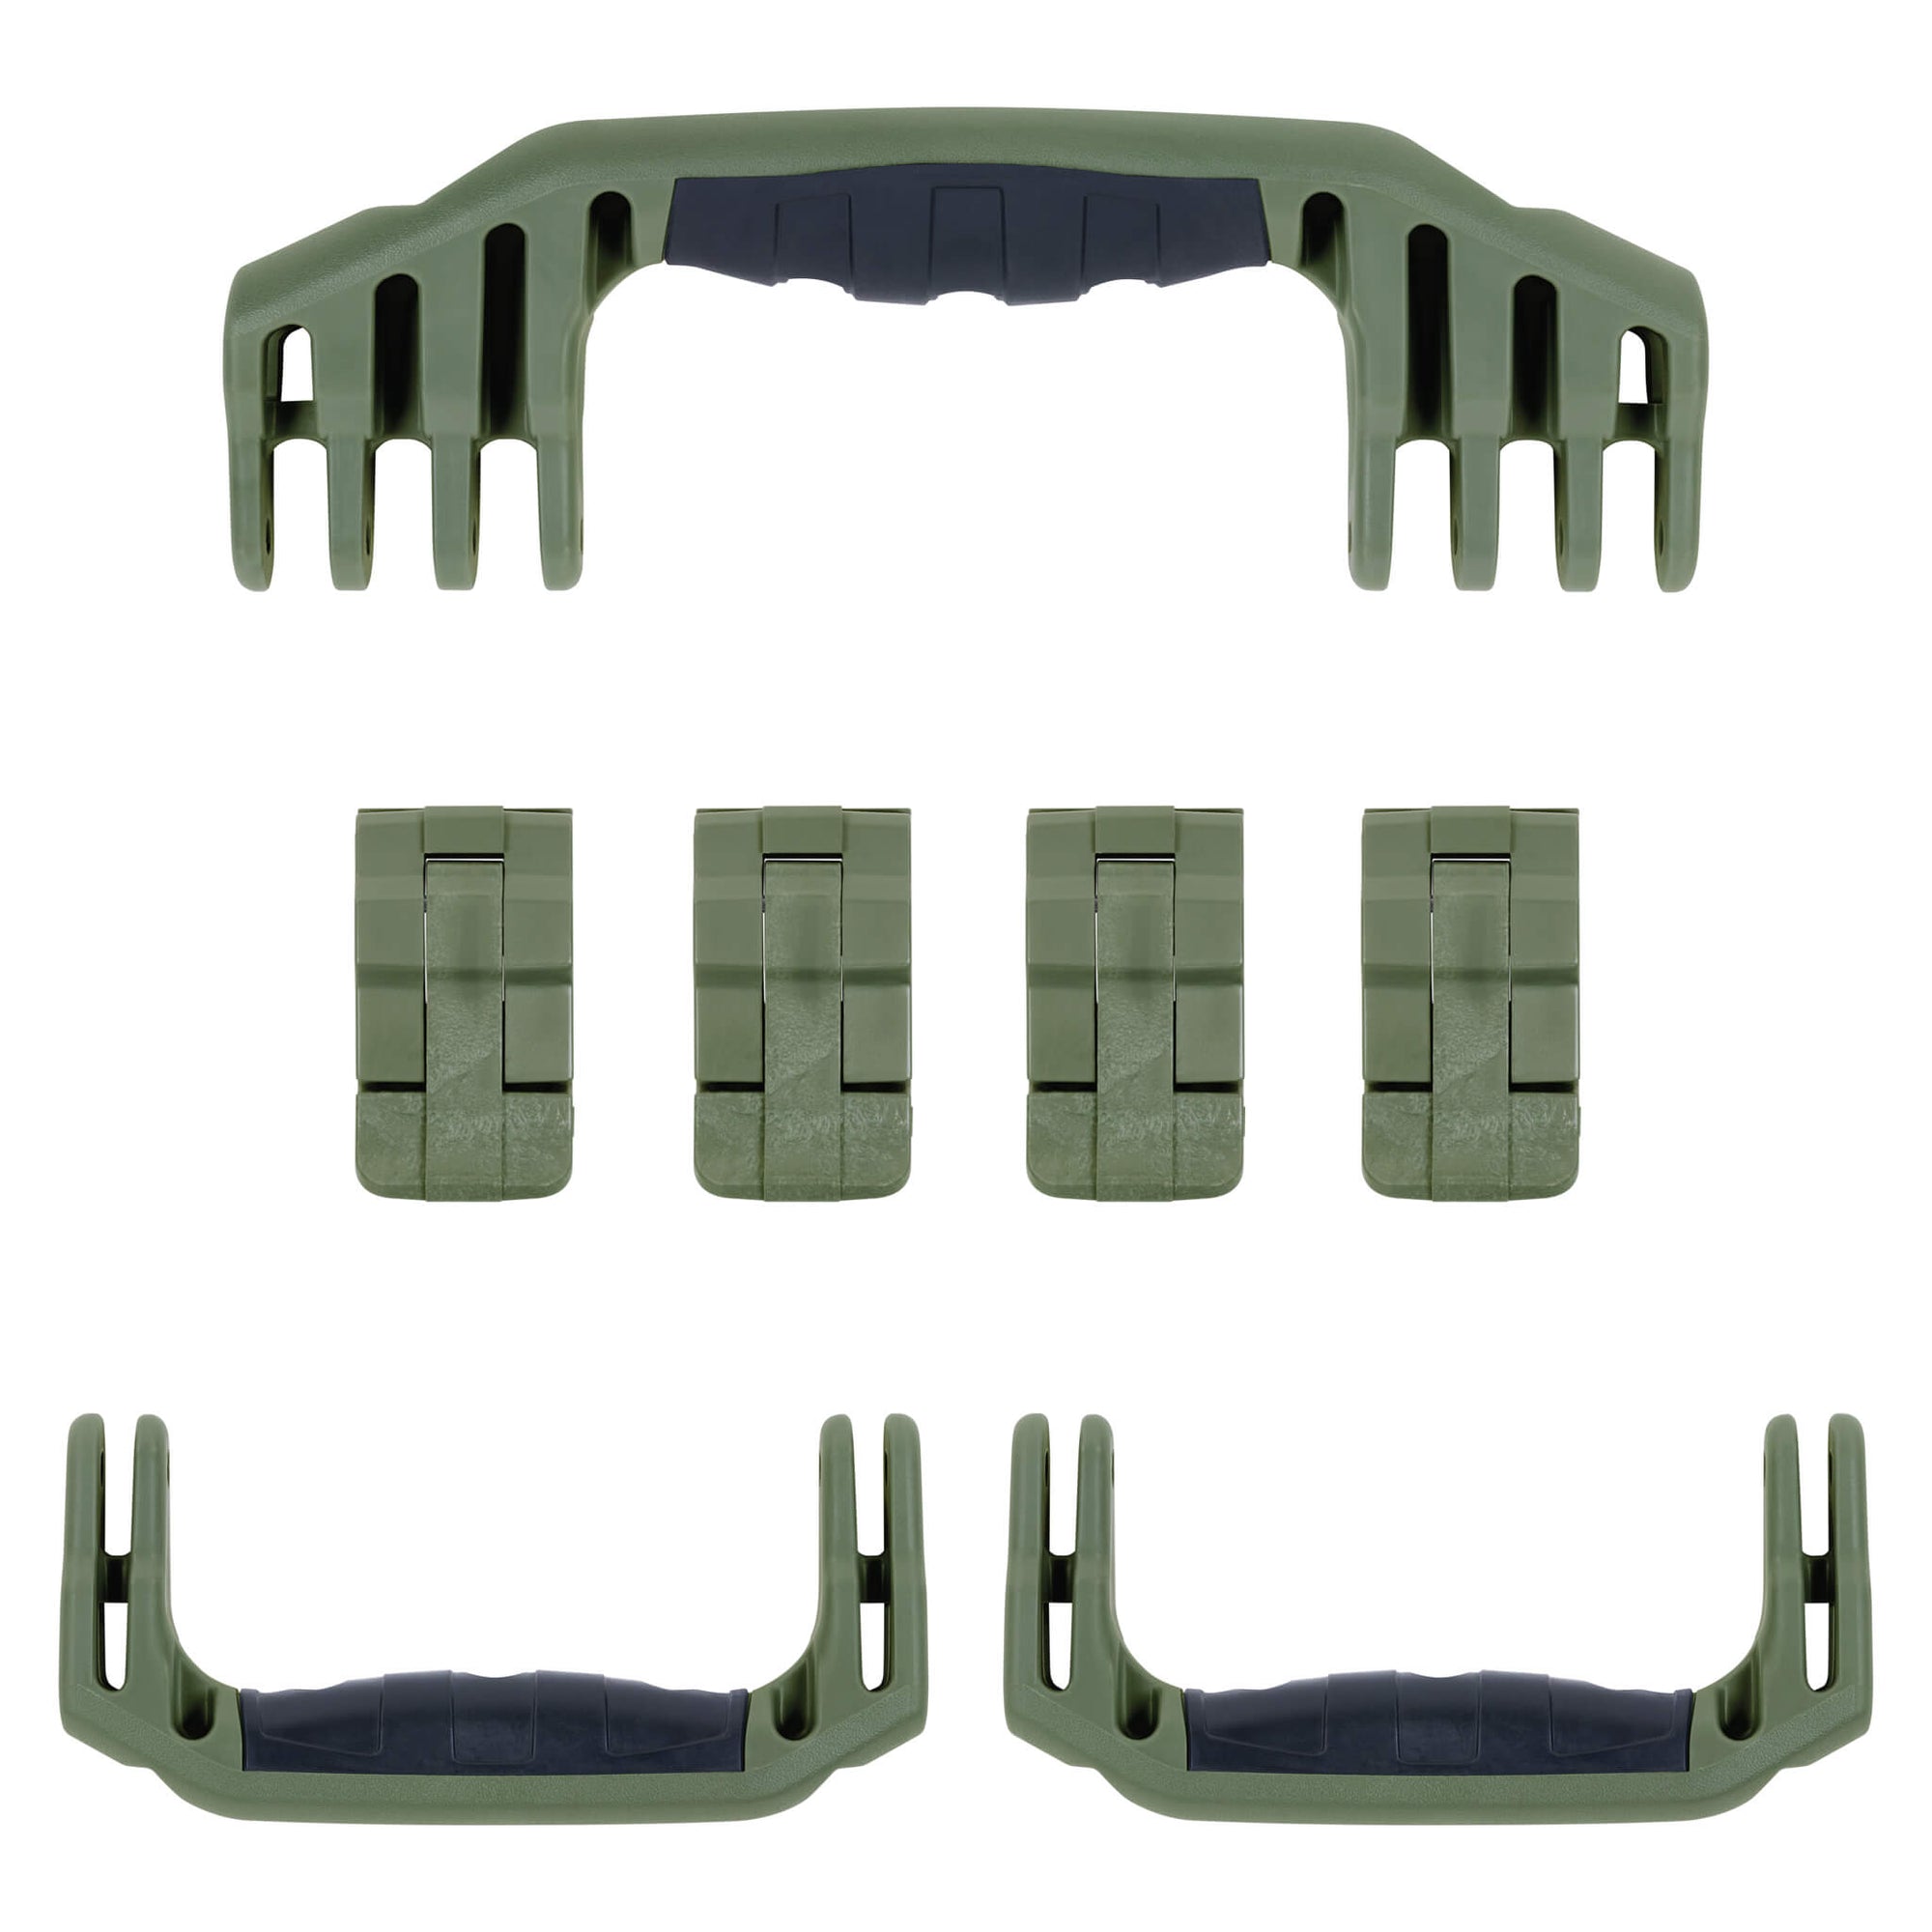 Pelican 1620 Replacement Handles & Latches, OD Green (Set of 3 Handles, 4 Latches) ColorCase 